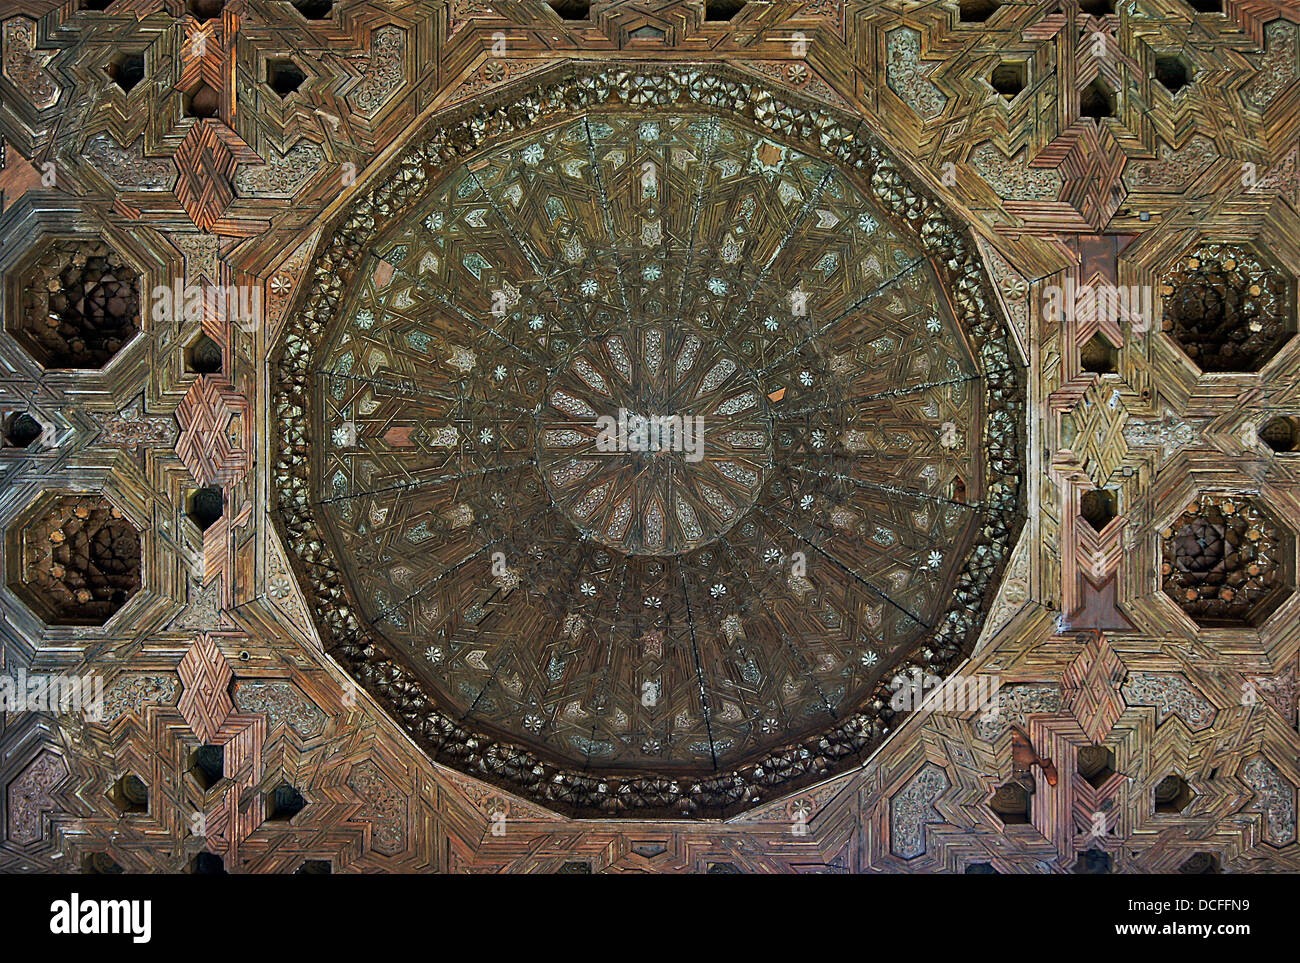 wooden ceiling of the Partal pavilion, Alhambra, Granada, Spain Stock Photo